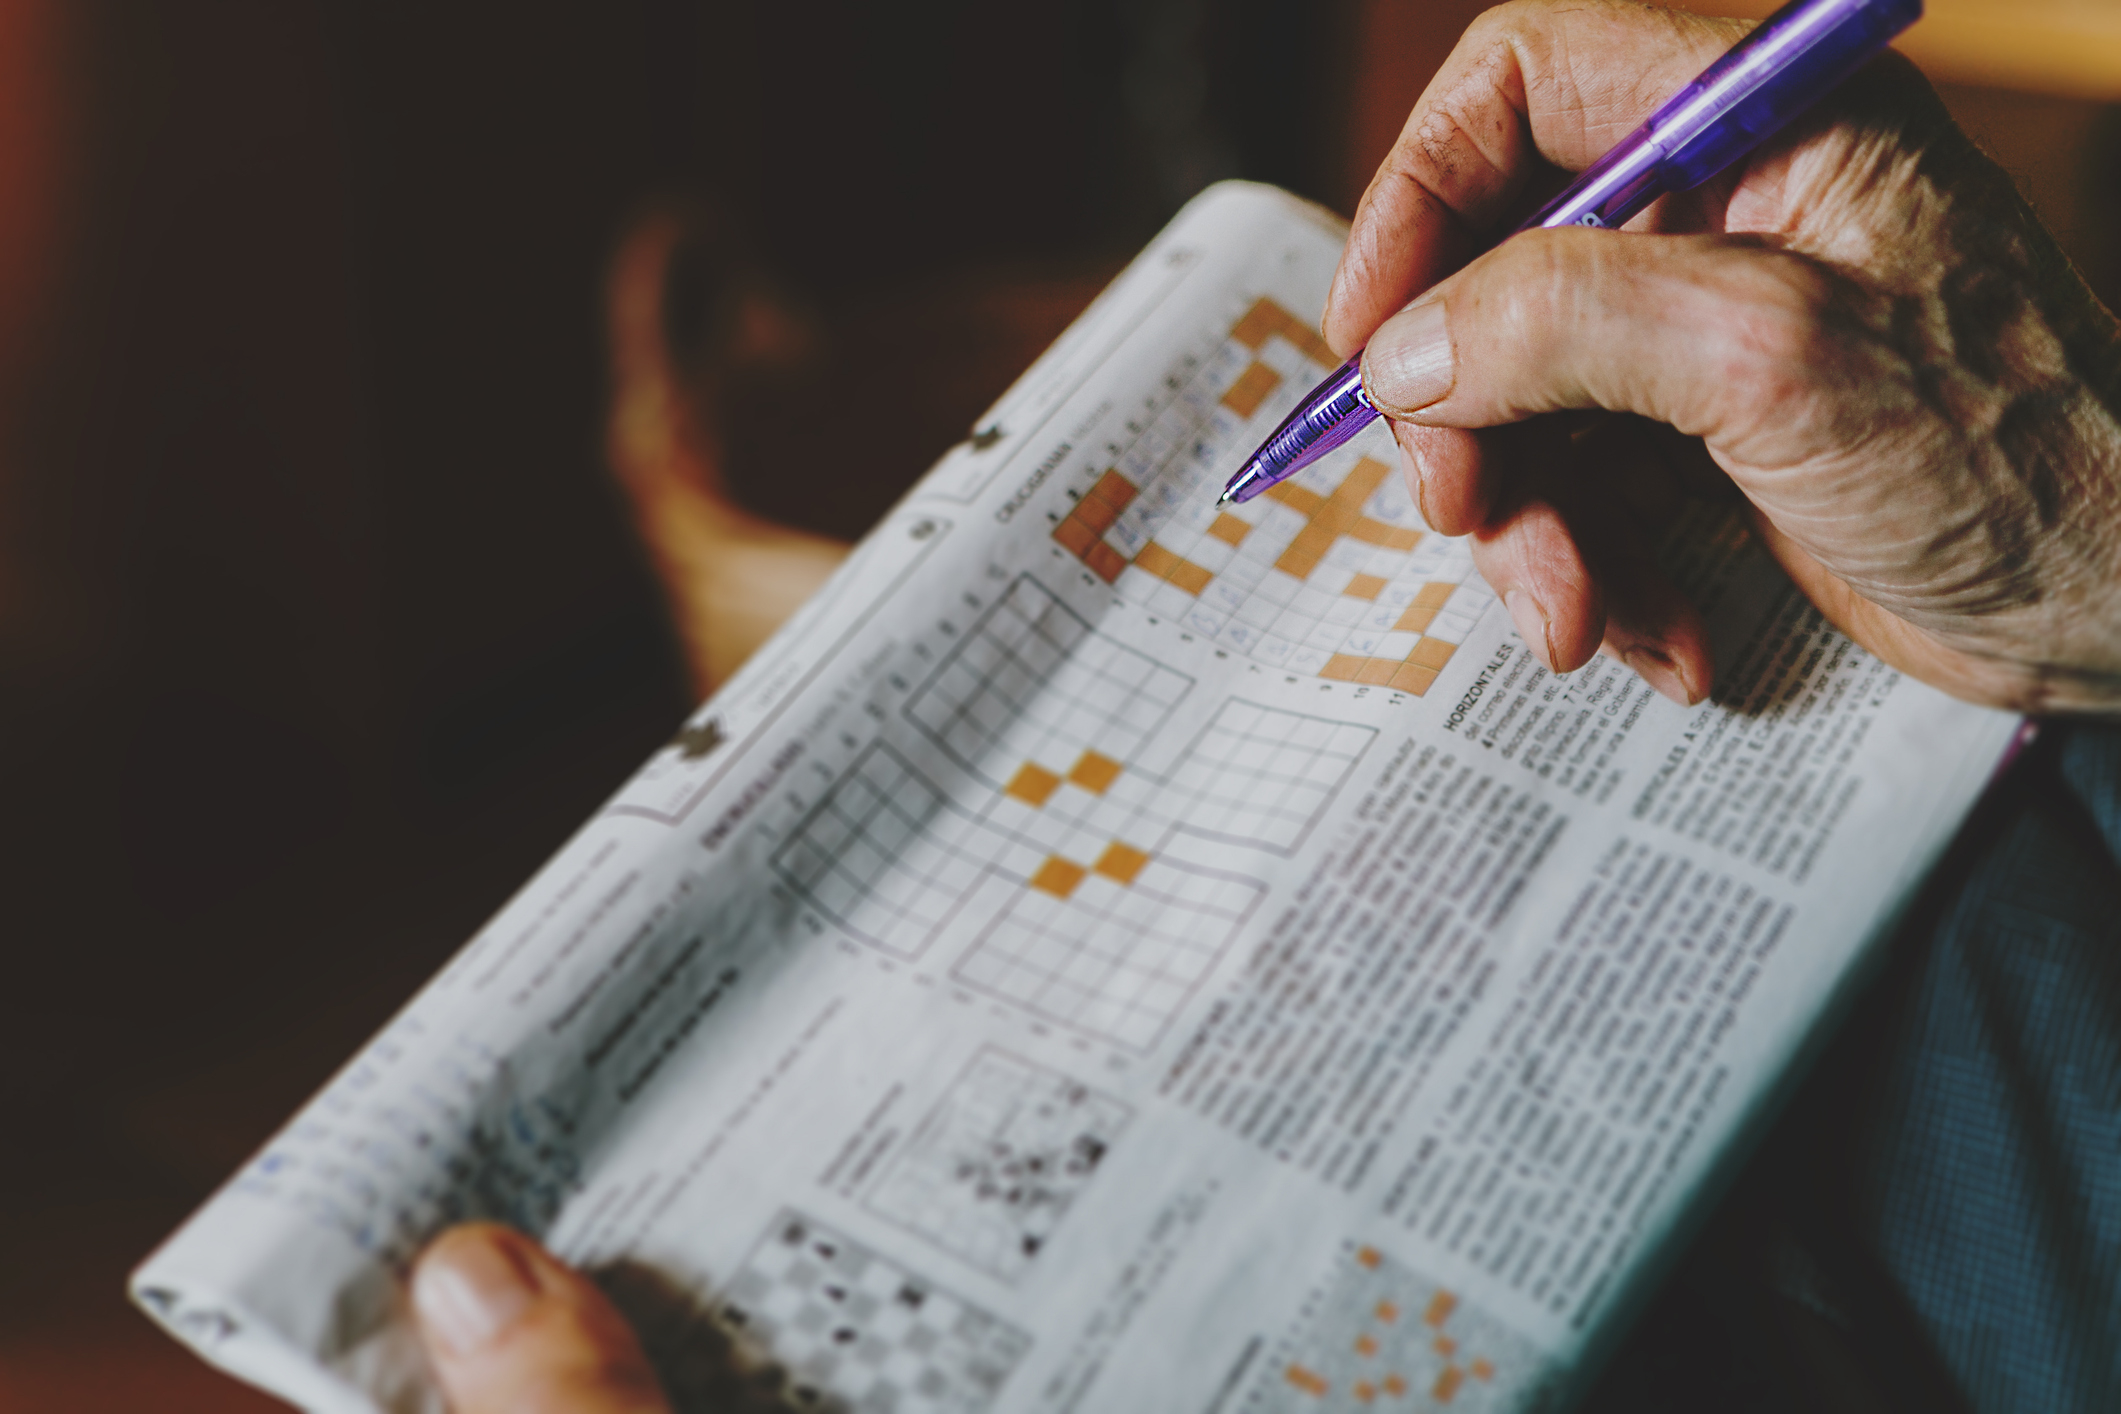 A person solves a crossword puzzle in a newspaper with a purple pen. The newspaper has various articles and puzzles visible but not legible